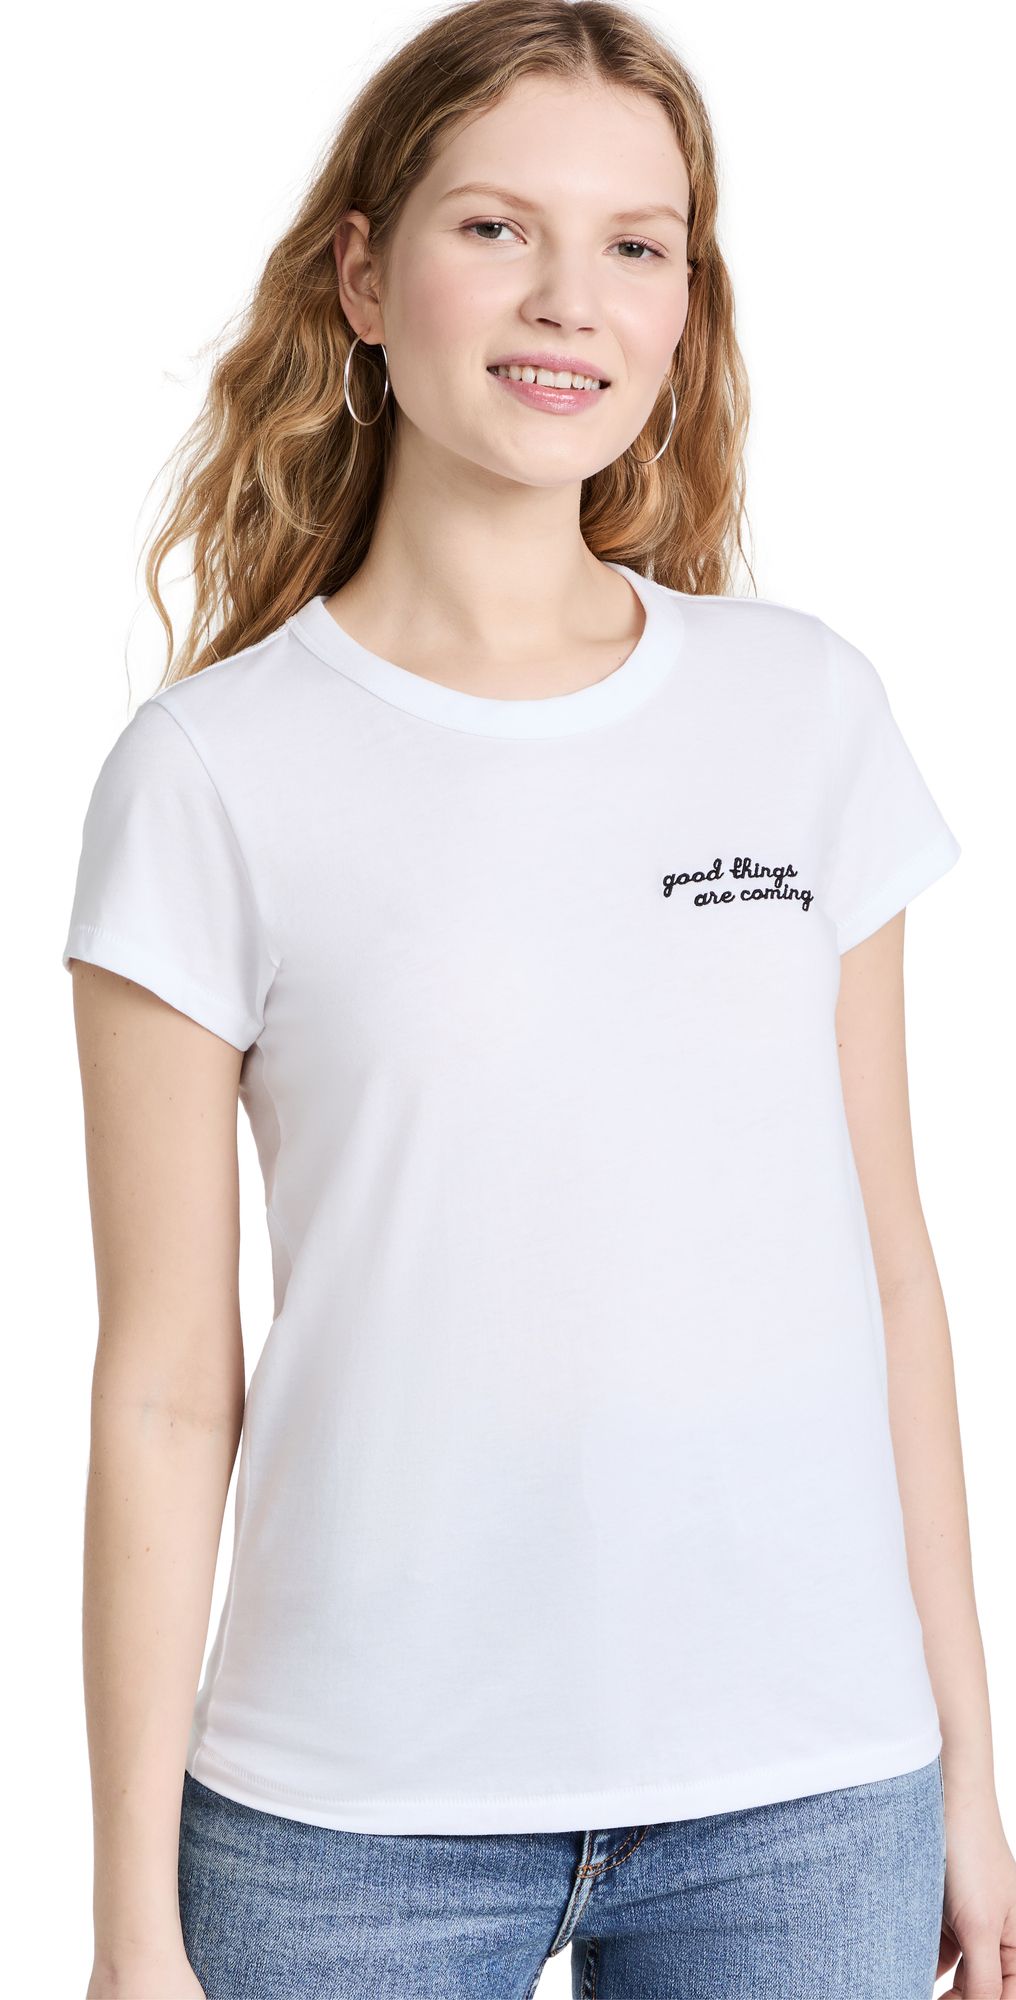 Good Things Are Coming Tee | Shopbop